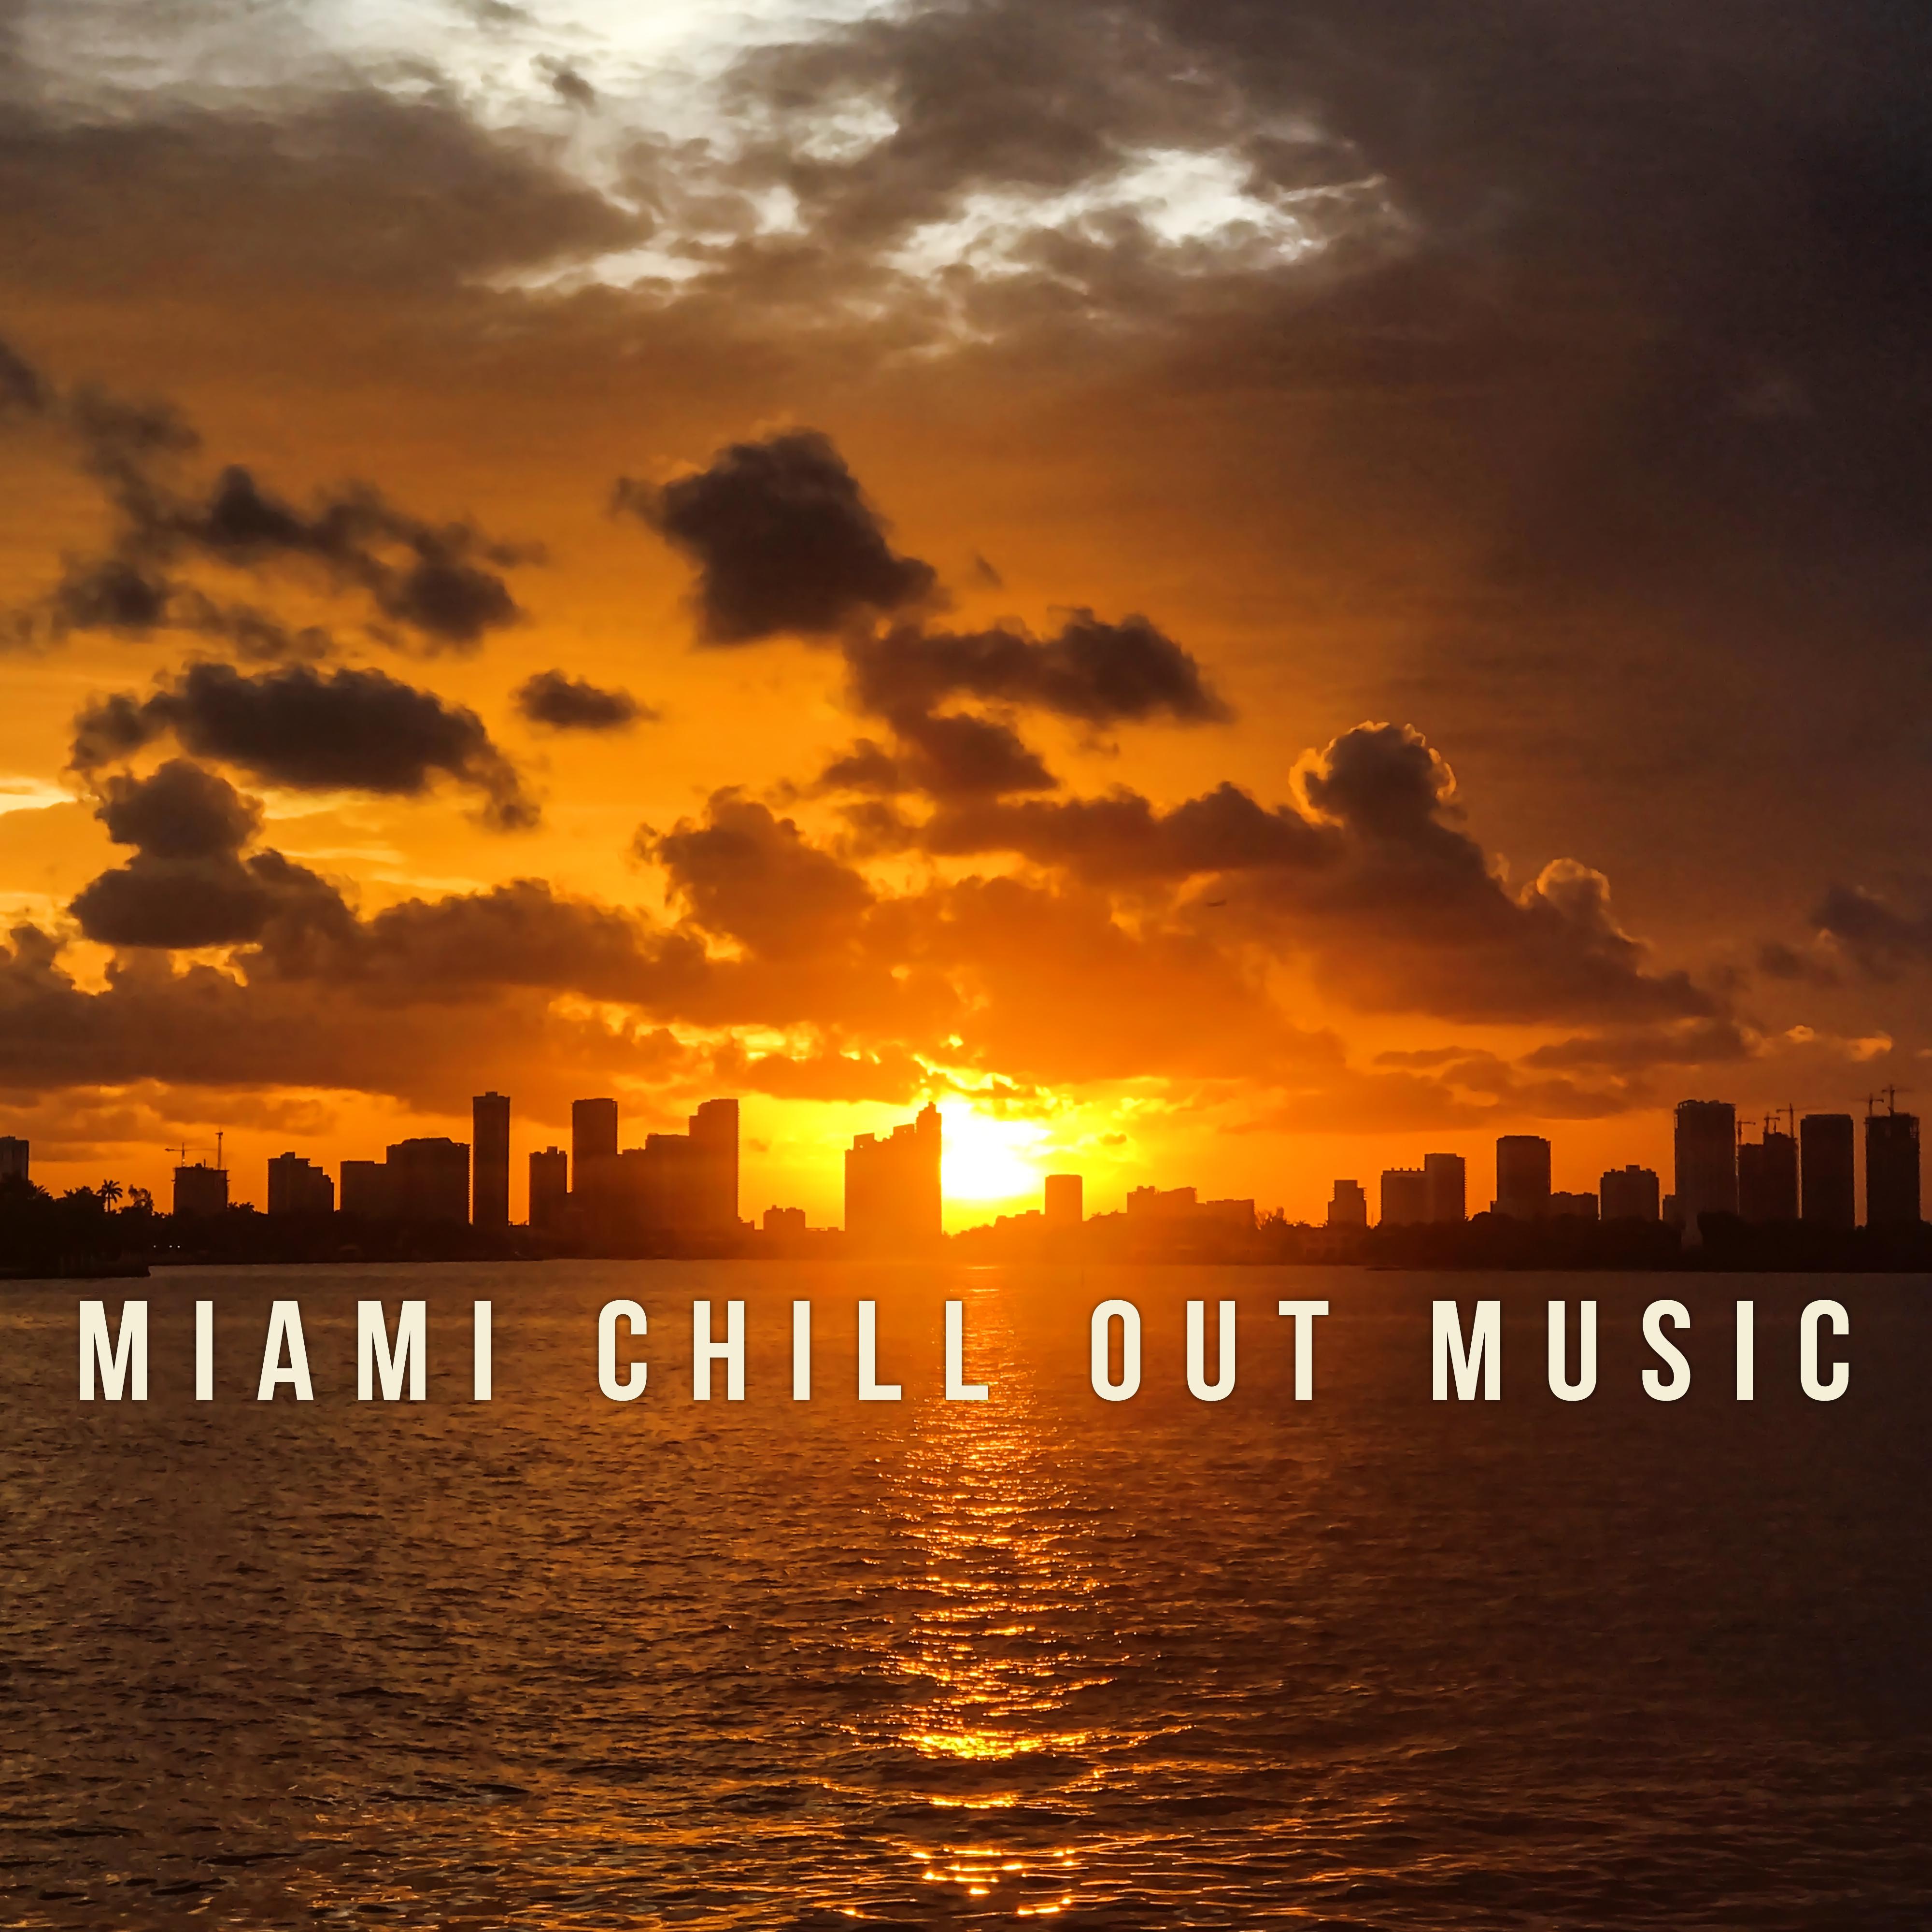 Miami Chill Out Music – Summer Beats, Holiday Relaxation, Stress Relief, Peaceful Songs